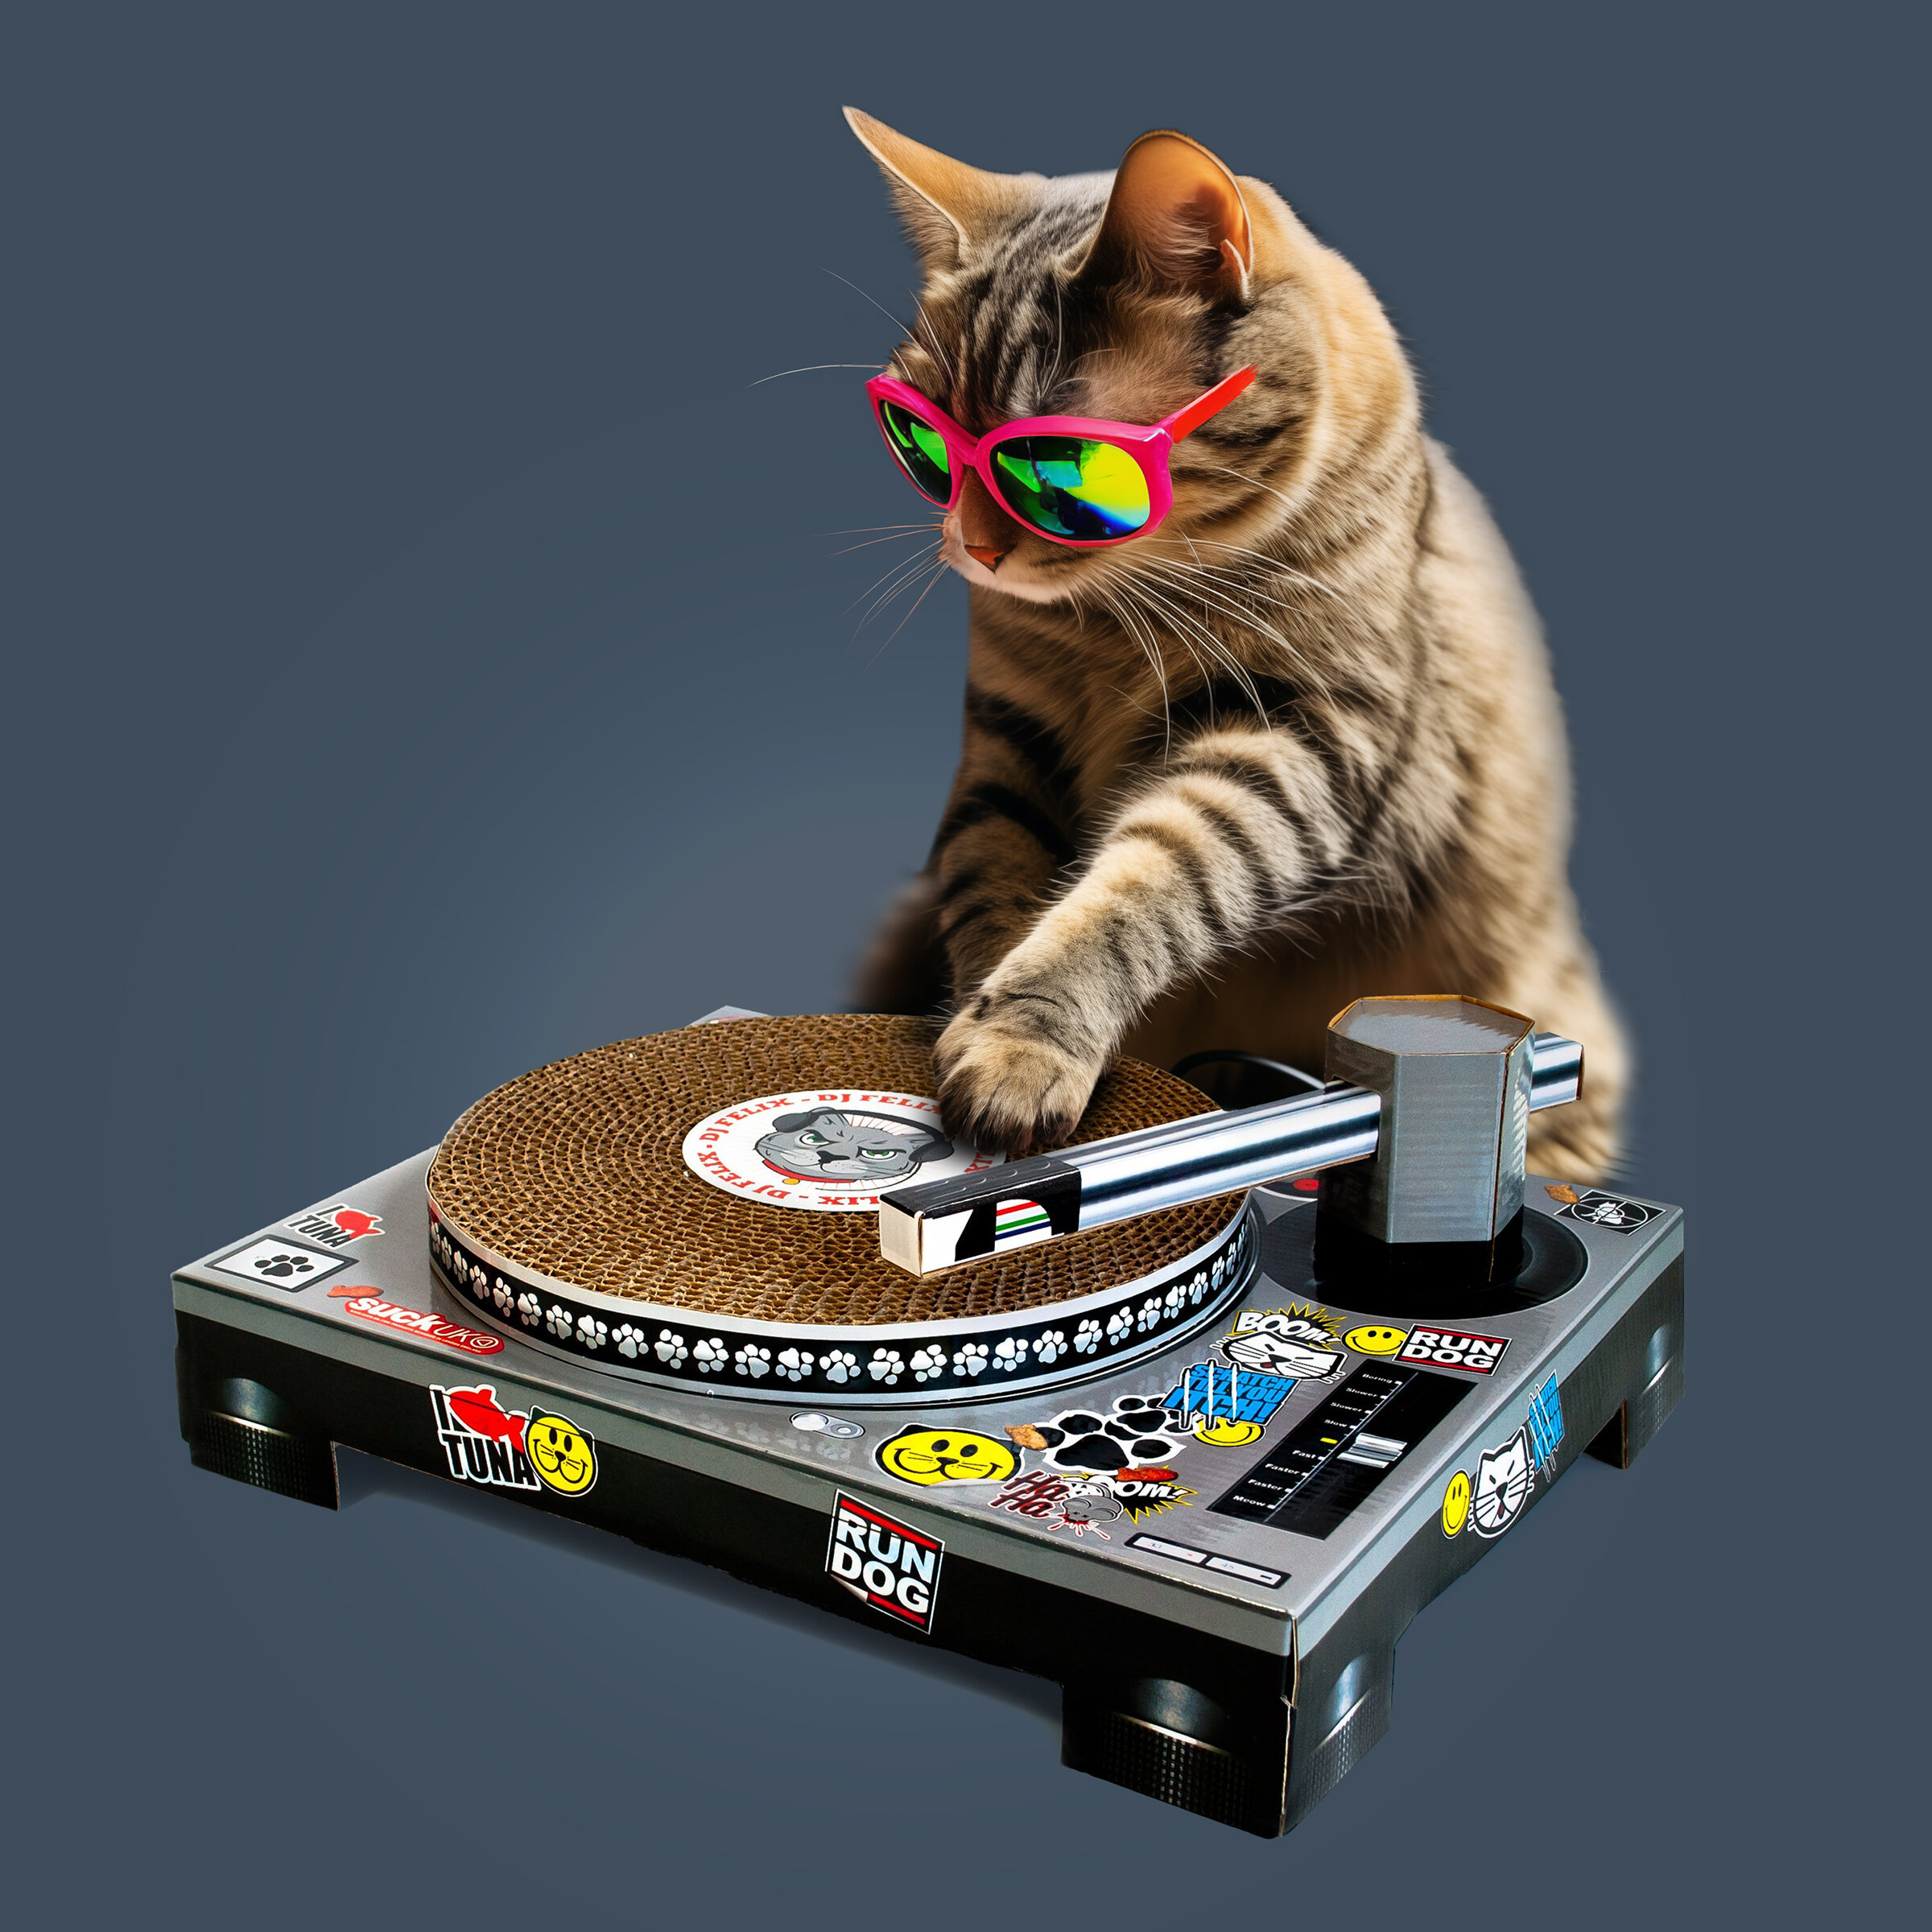 A cat spinning discs at a nightclub